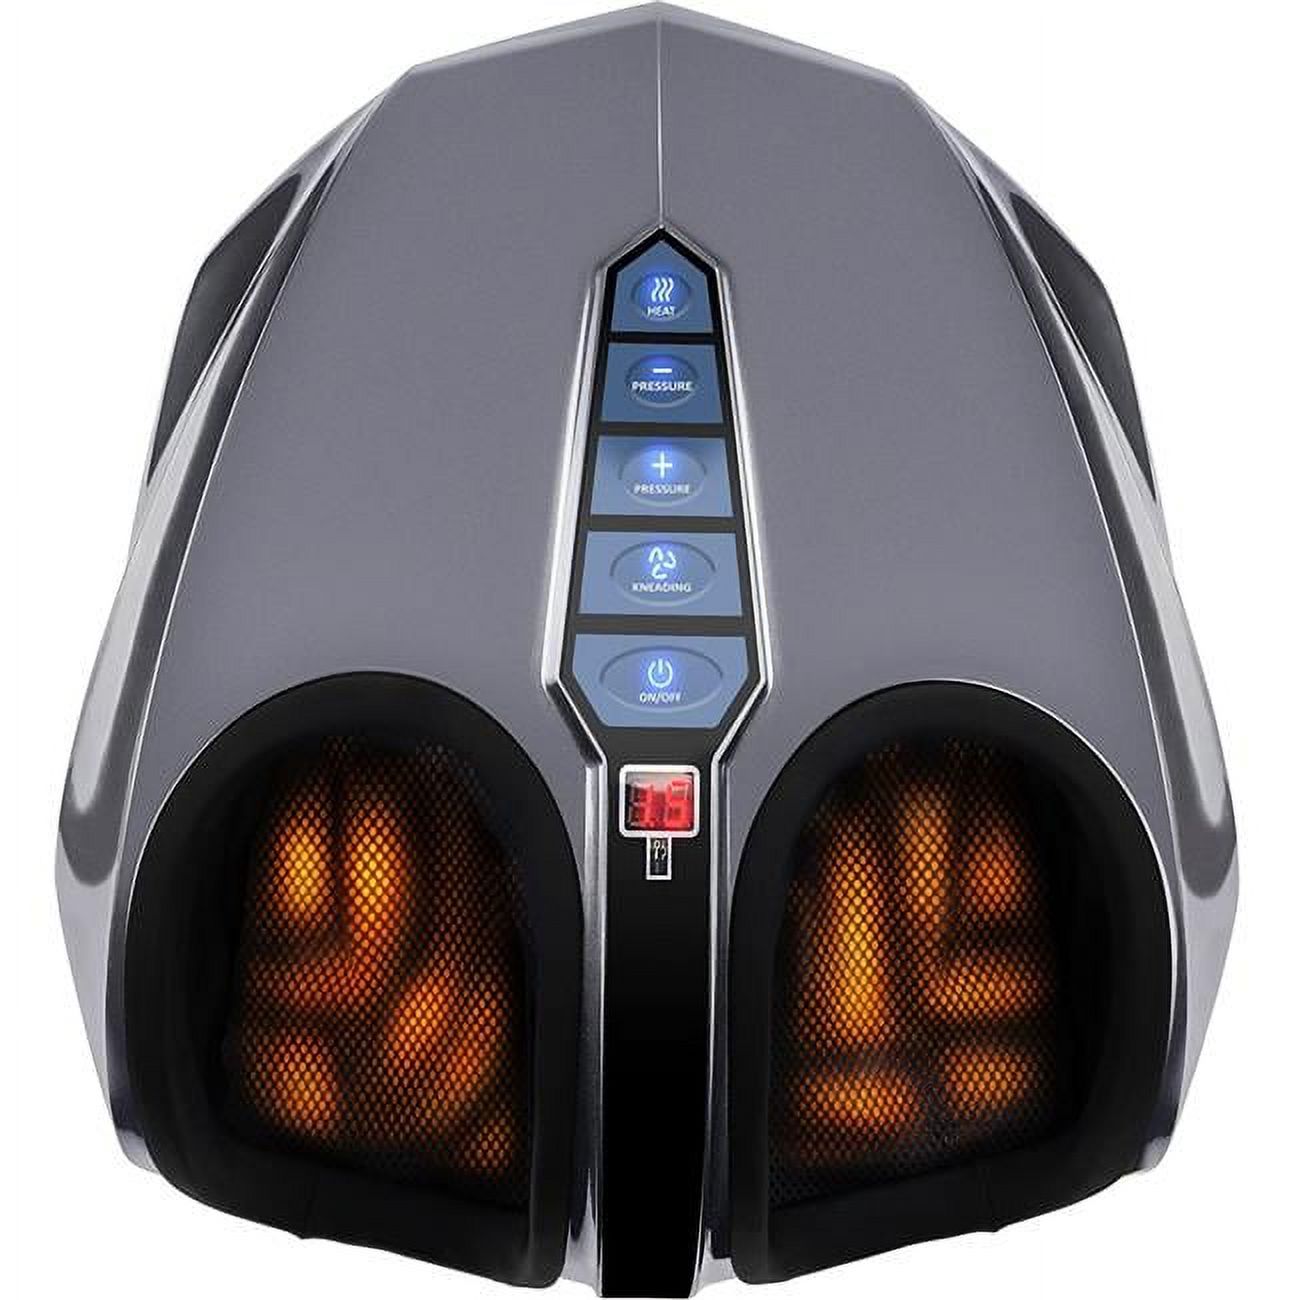 Miko Shiatsu Foot Massager with Heat Kneading and Rolling and Pressure Settings - 2 Wireless Remotes - image 1 of 10